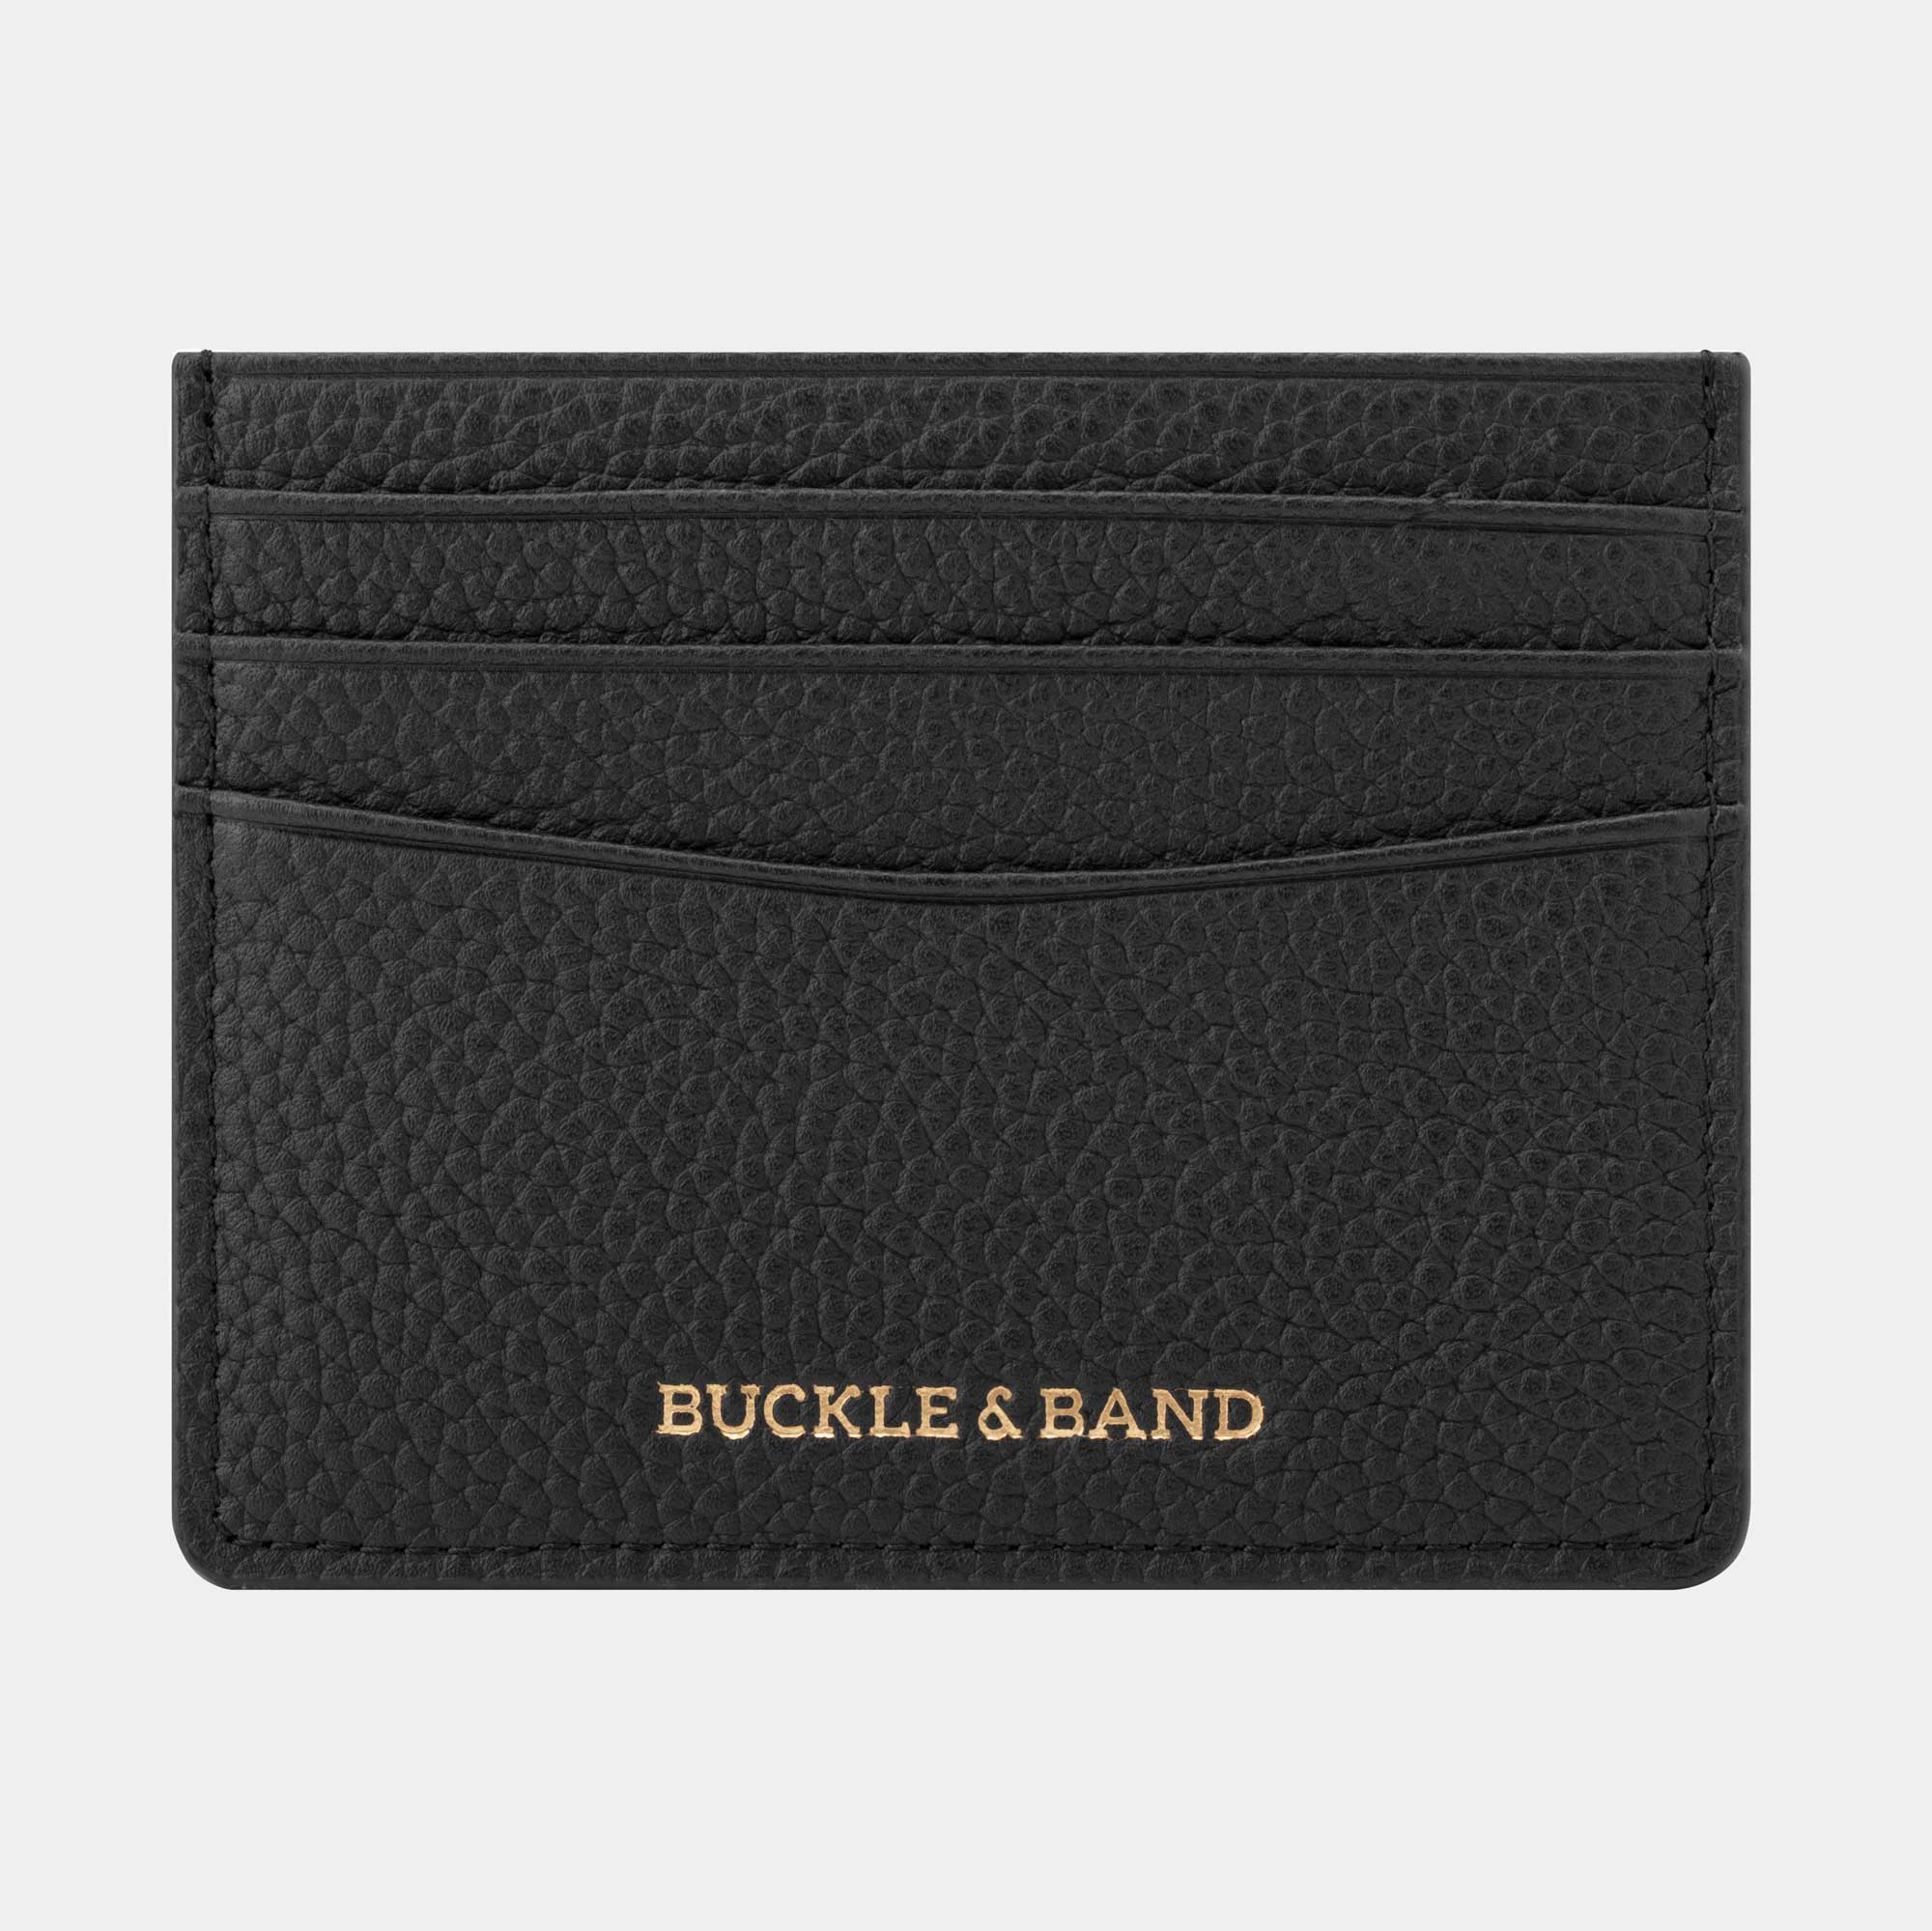 Black leather card holder with strap